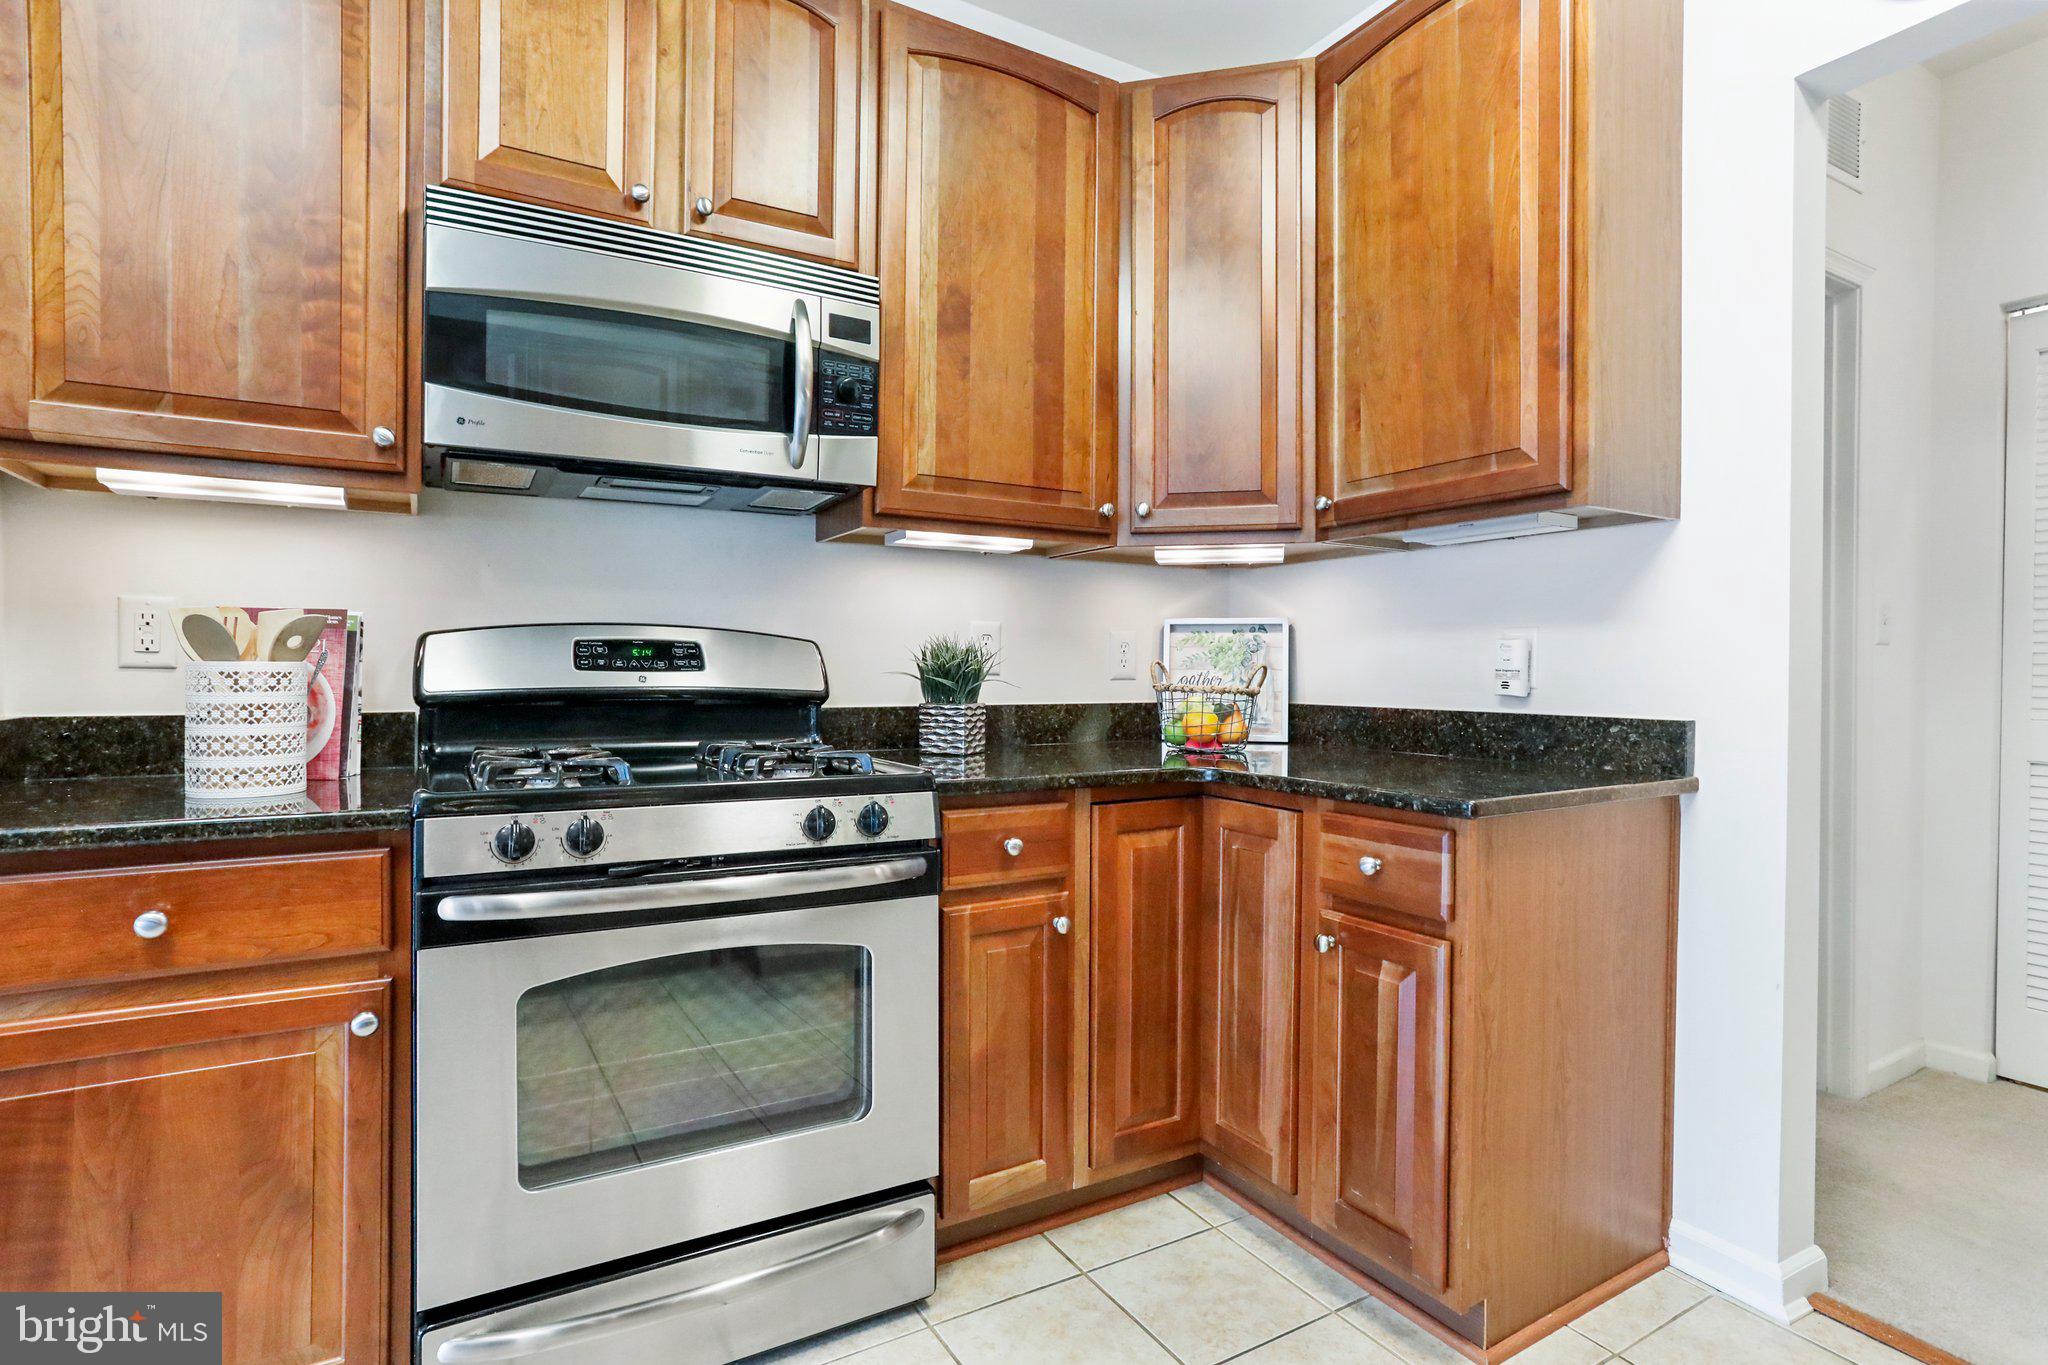 a kitchen with stainless steel appliances granite countertop wooden cabinets a stove top oven